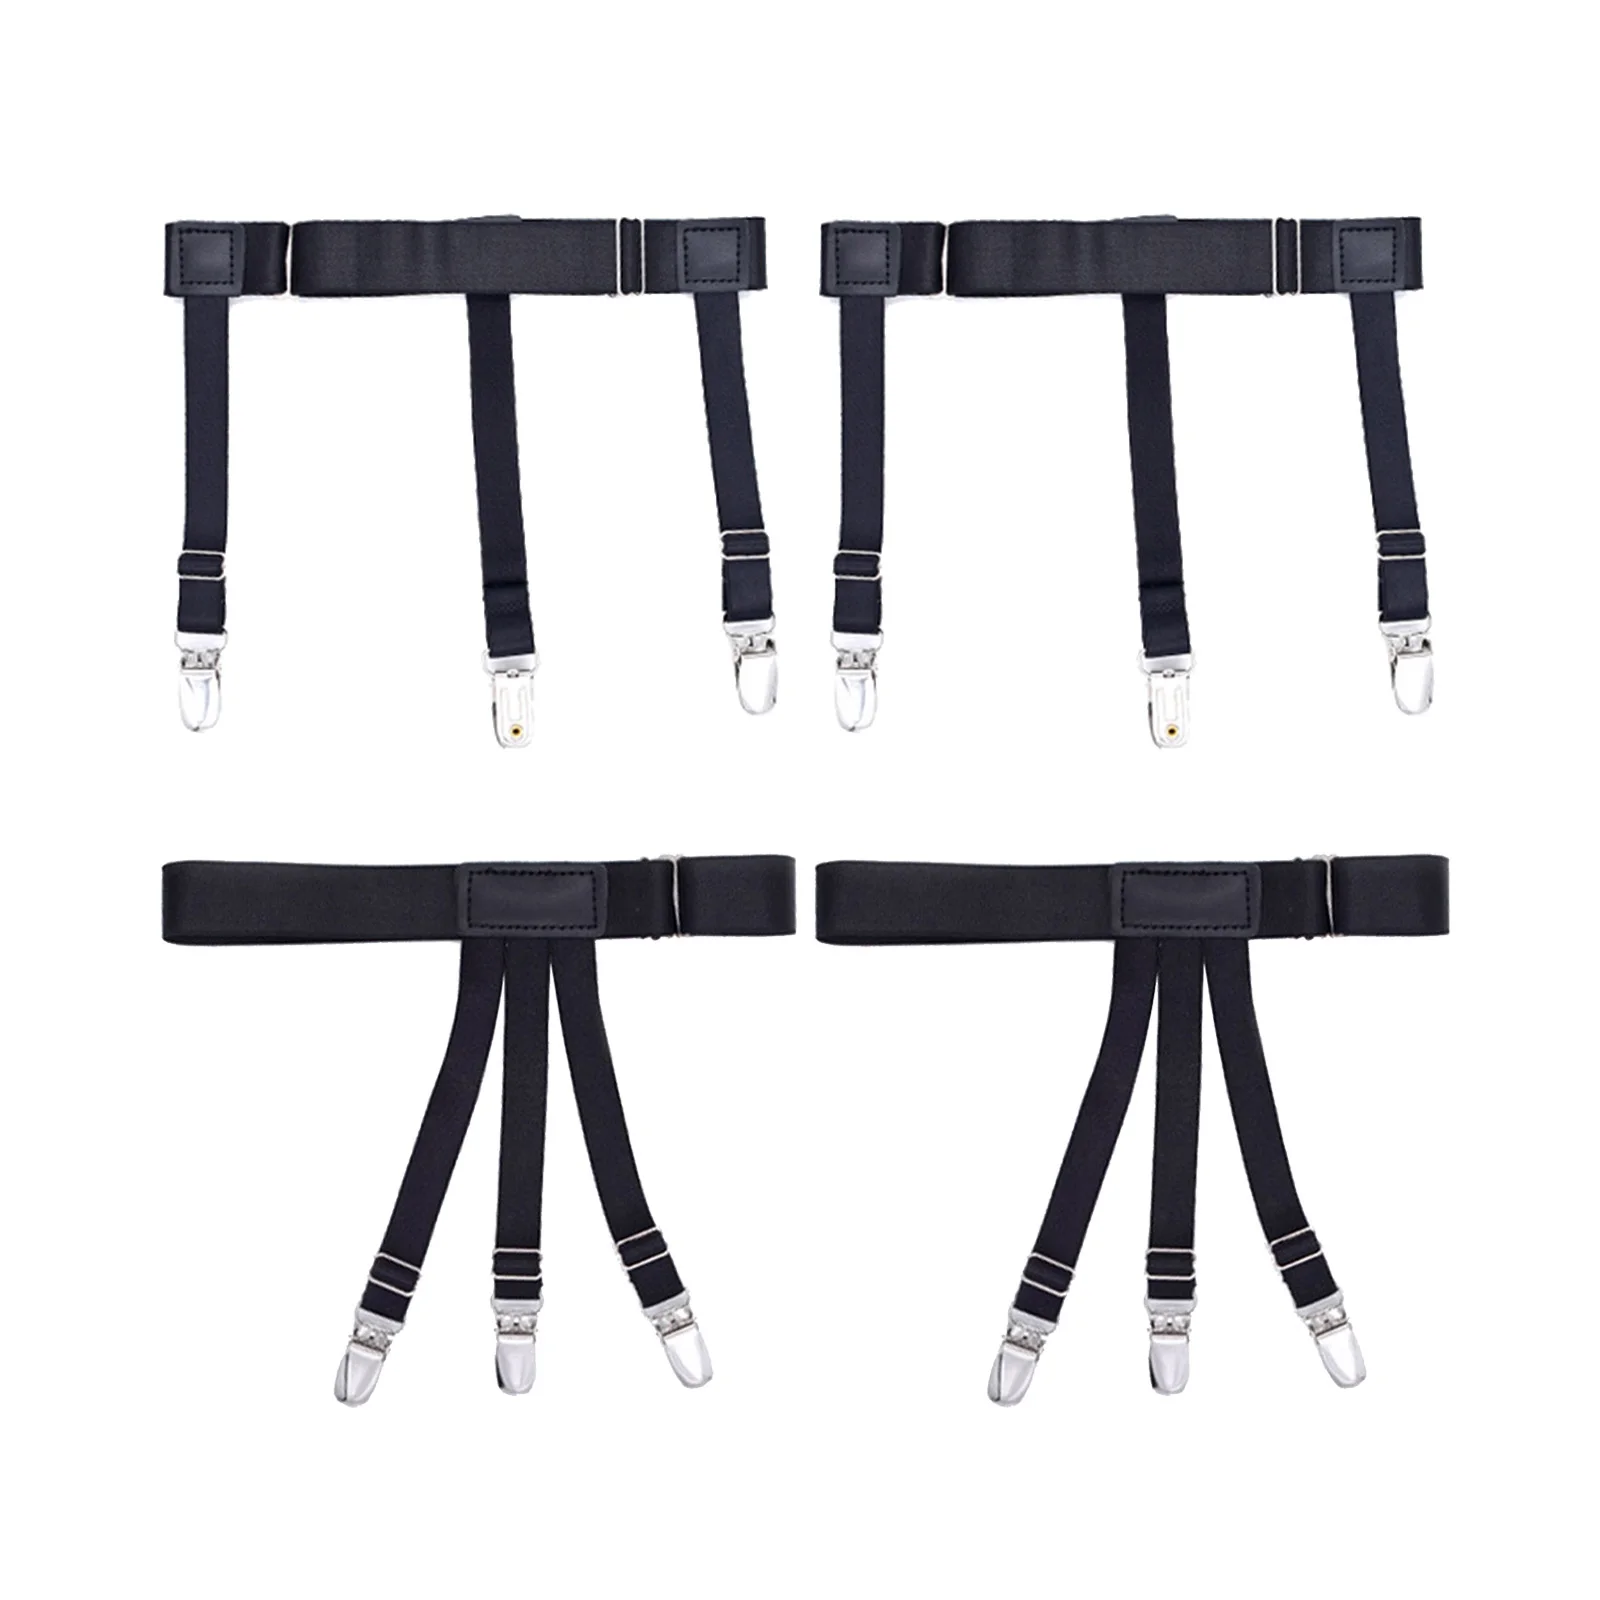 2x  Leg Garter Style  Shirt Holders Adjustable Elastic Shirts Garters with Non-Slip Clips for Professional Business Men